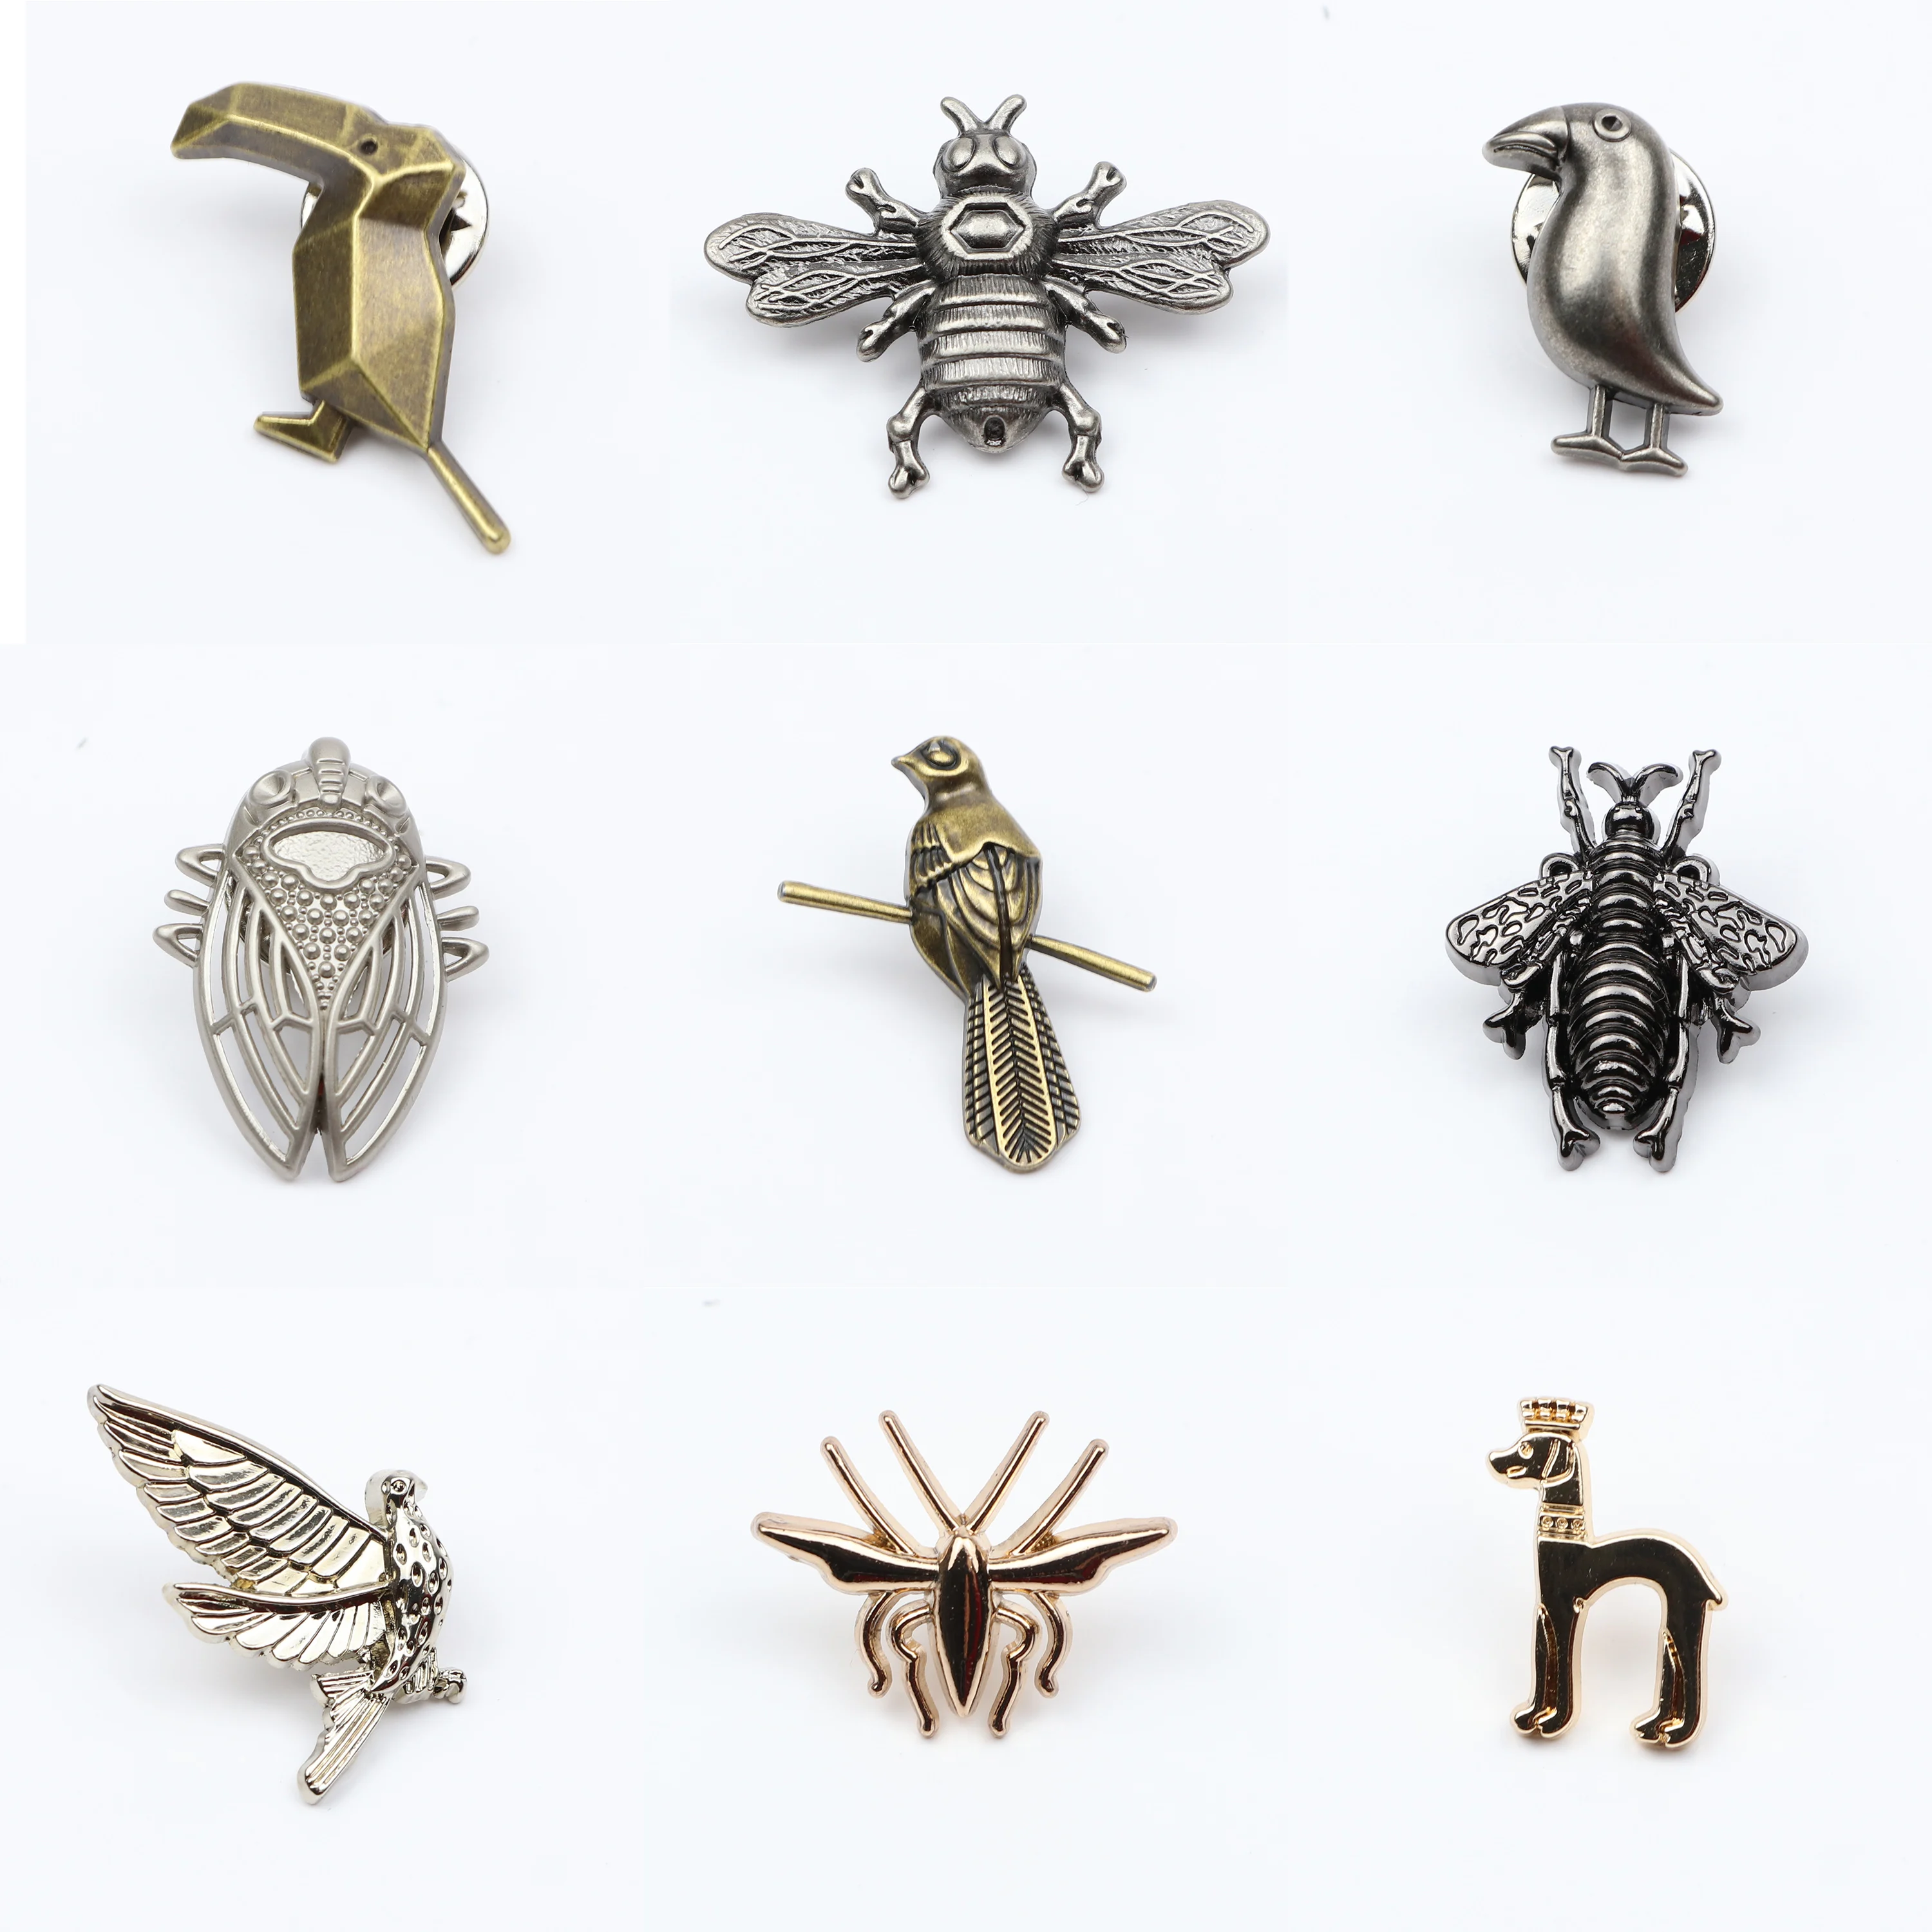 

Animal Brooch Pins Retro For Men Bee Spider Brooches Collar Suit Breastpin Pin Jewelry Wedding Party Neckwear Accessories Gift